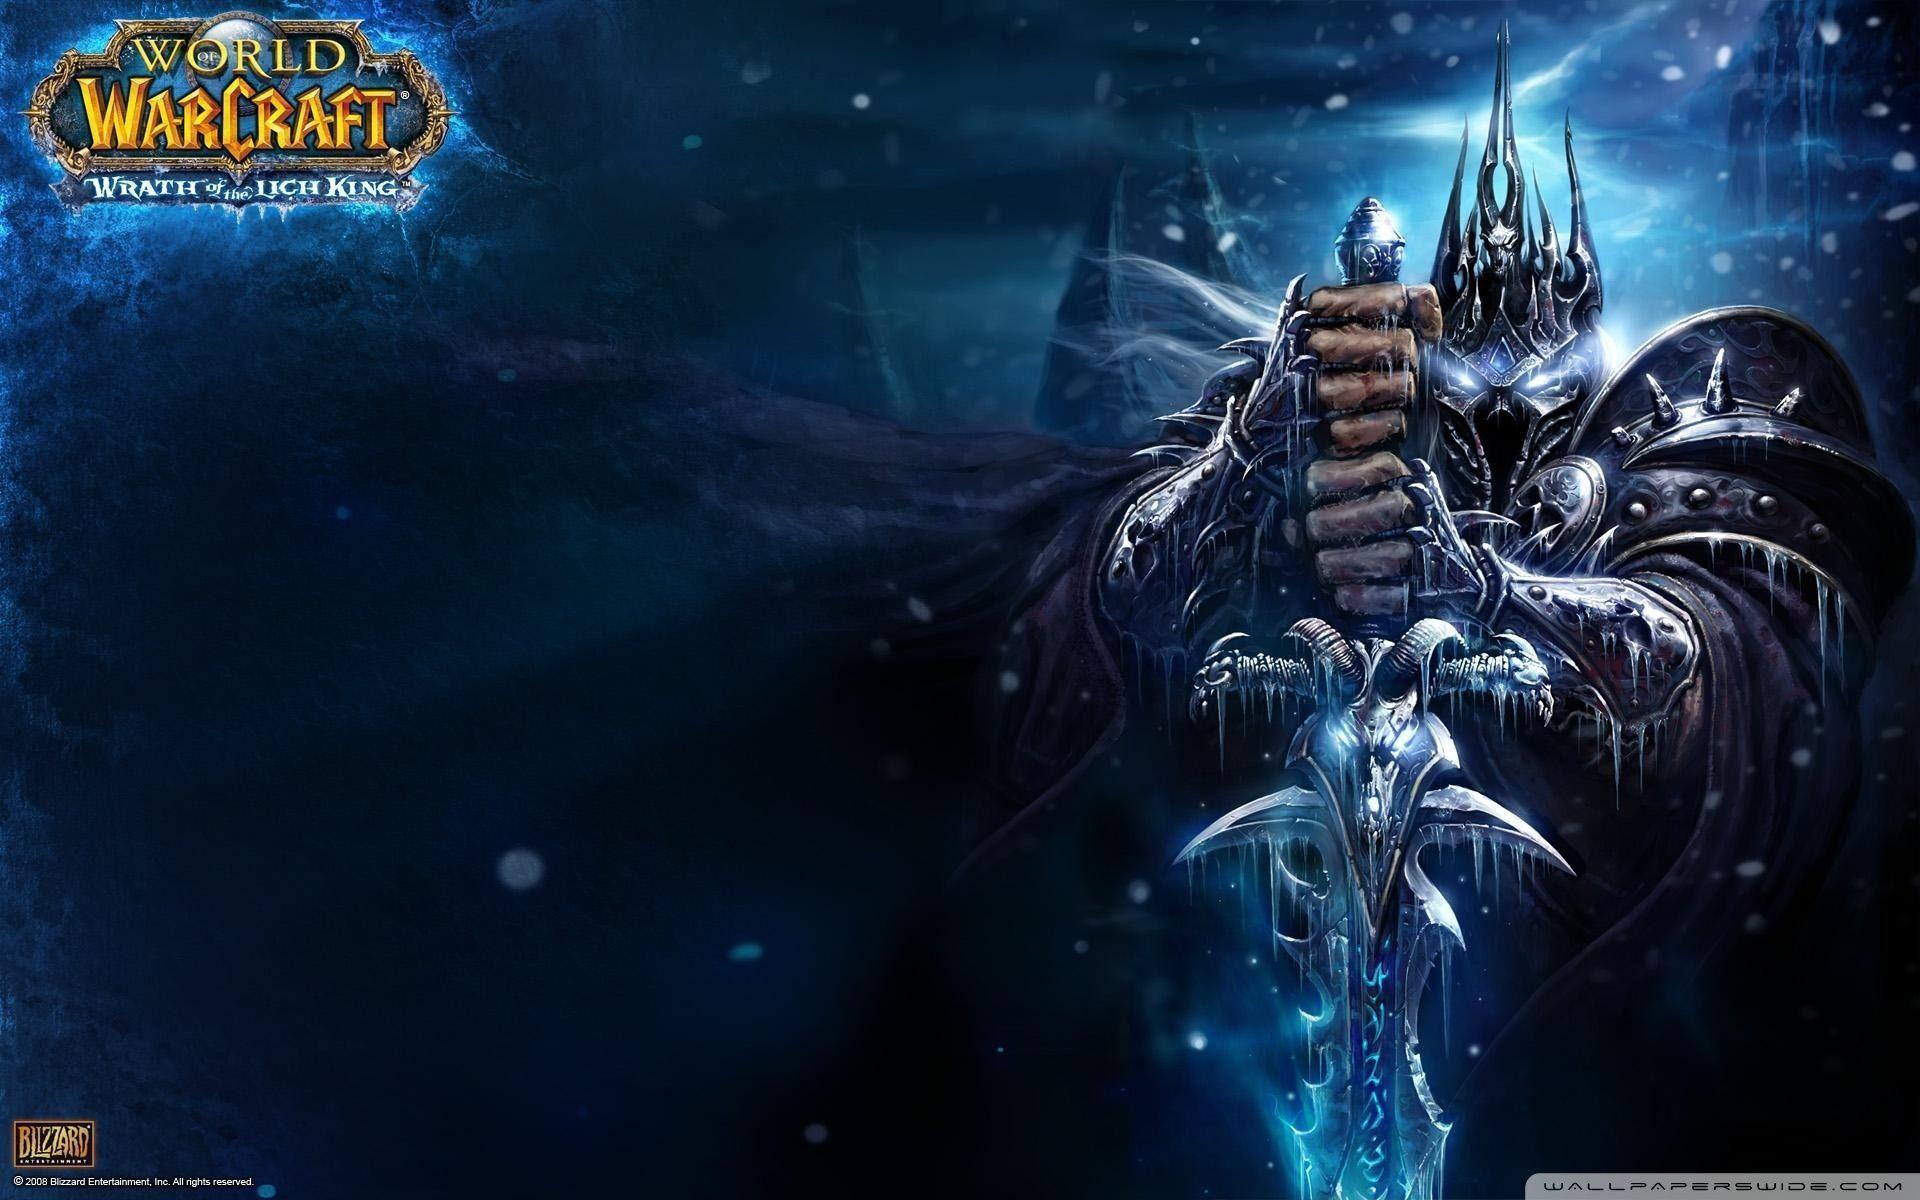 Lichking Wallpapers